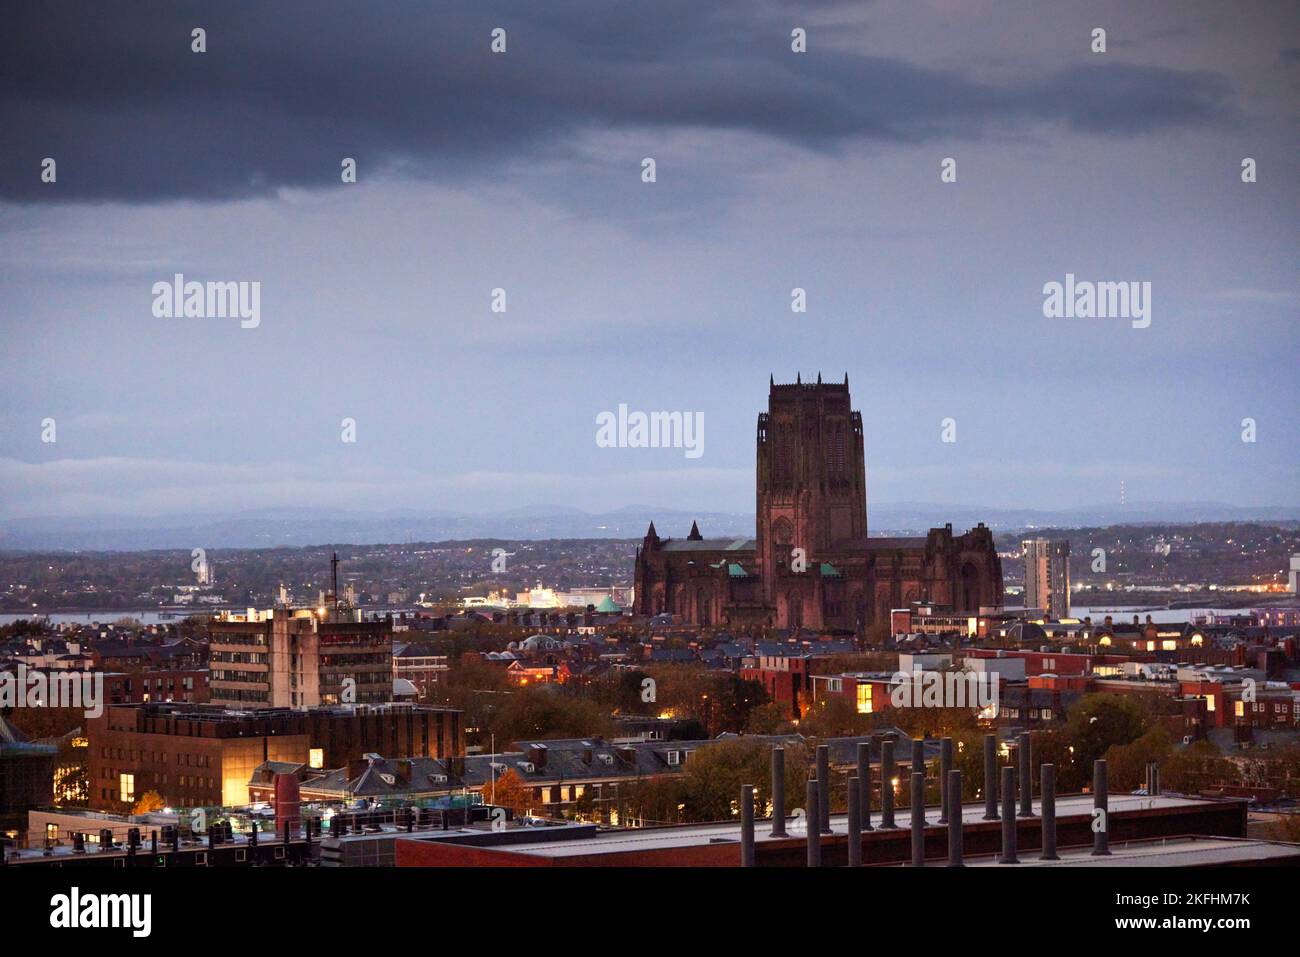 iverpool Cathedral  Anglican Diocese of Liverpool, built on St James's Mount in Liverpool, Stock Photo